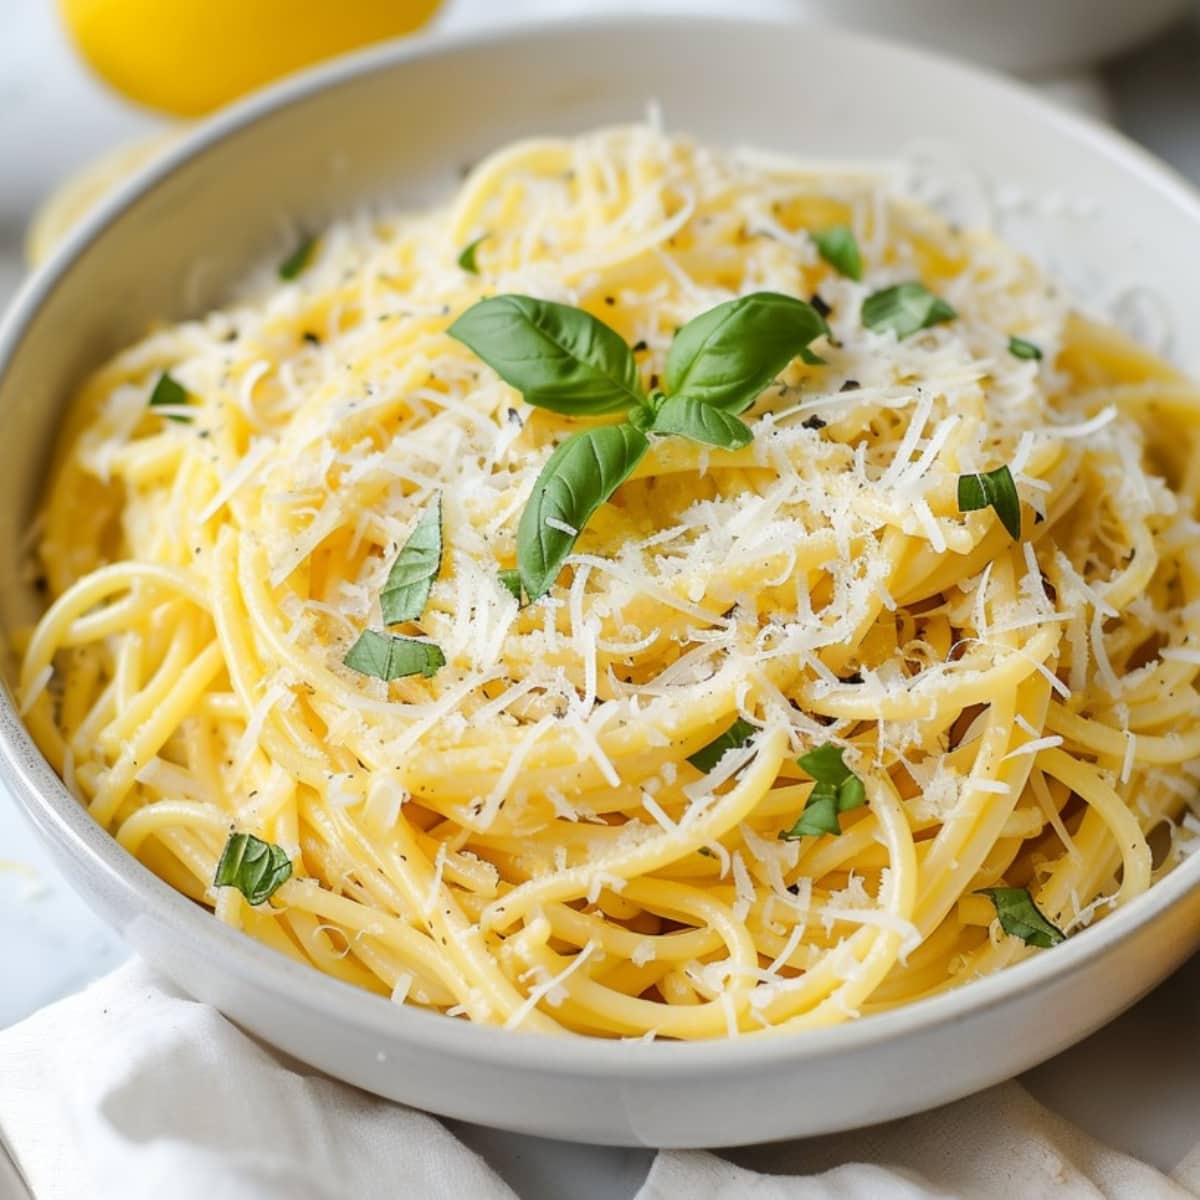 A savory pasta topped with basil, parmesan cheese and herbs in a bowl